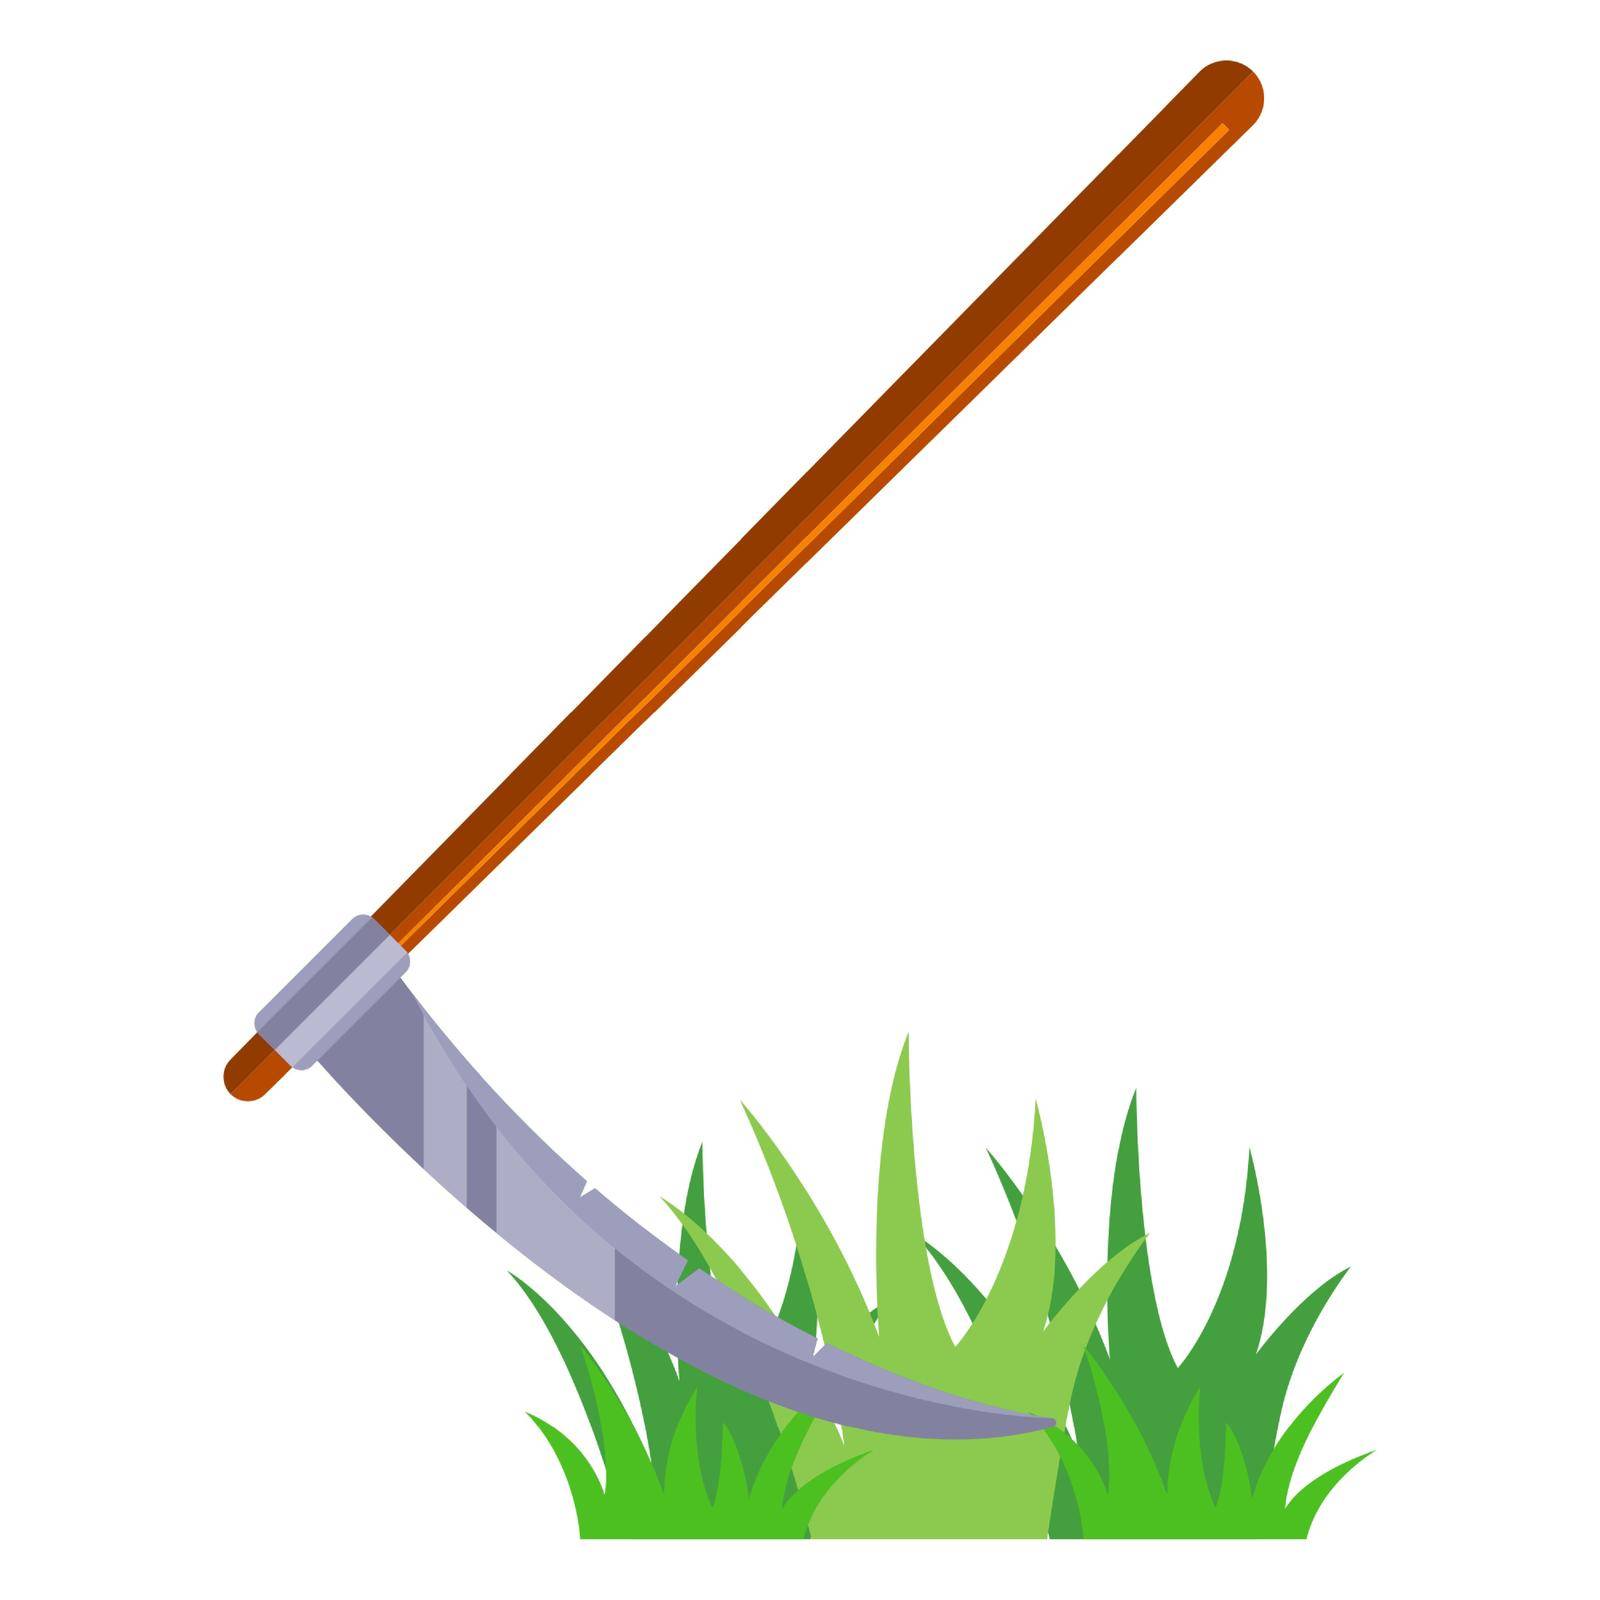 the scythe mows the grass. agricultural equipment for cleaning the territory. by PlutusART